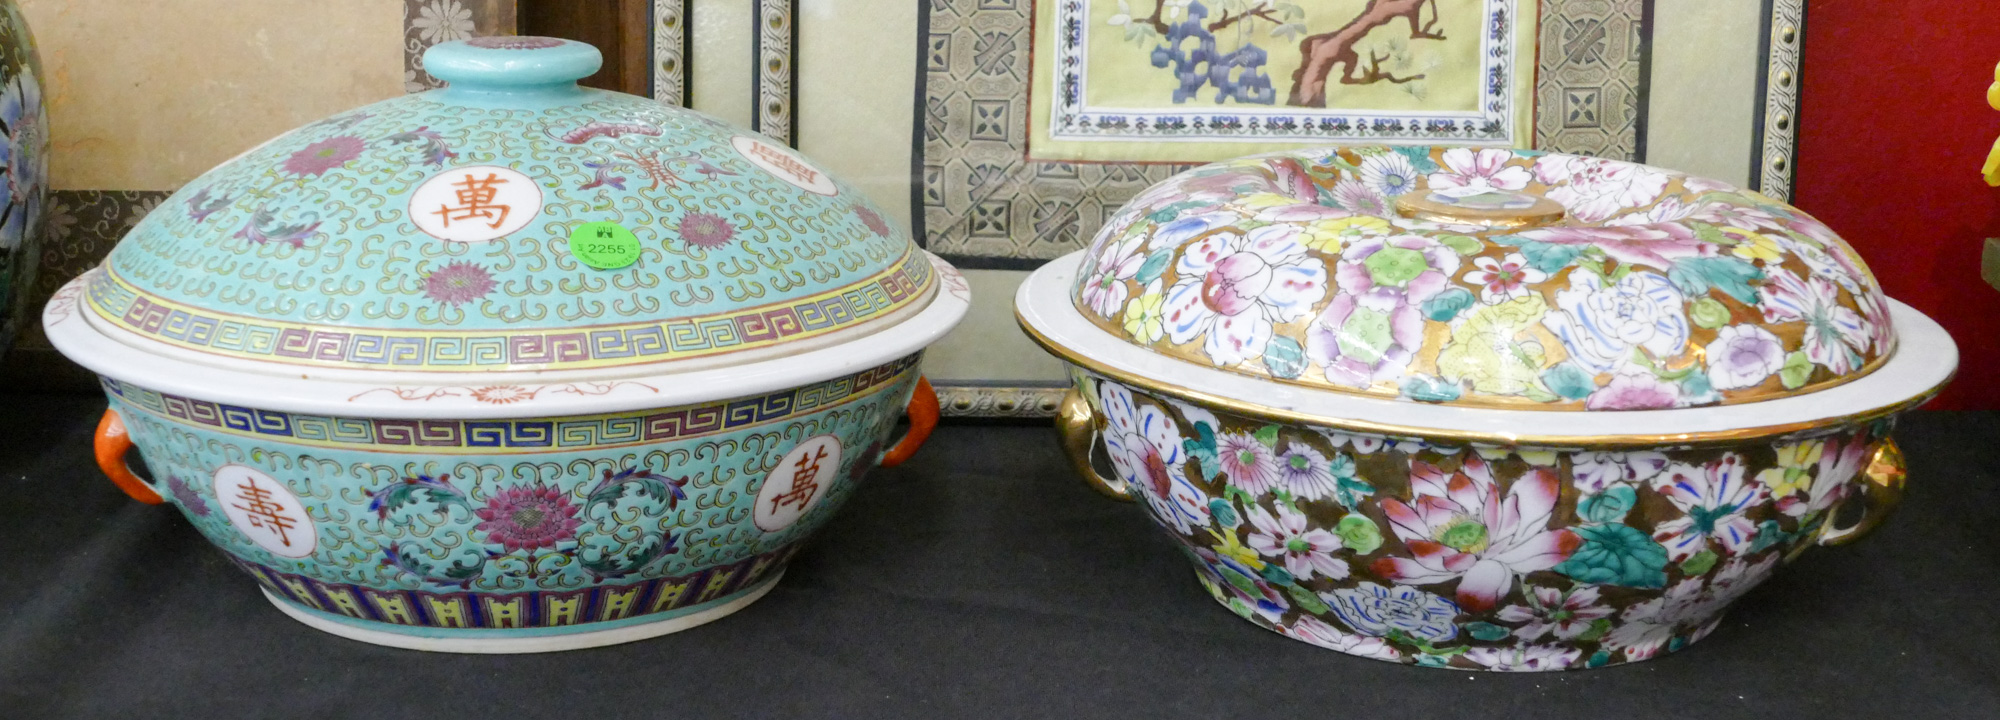 2pc Vintage Chinese Porcelain Covered